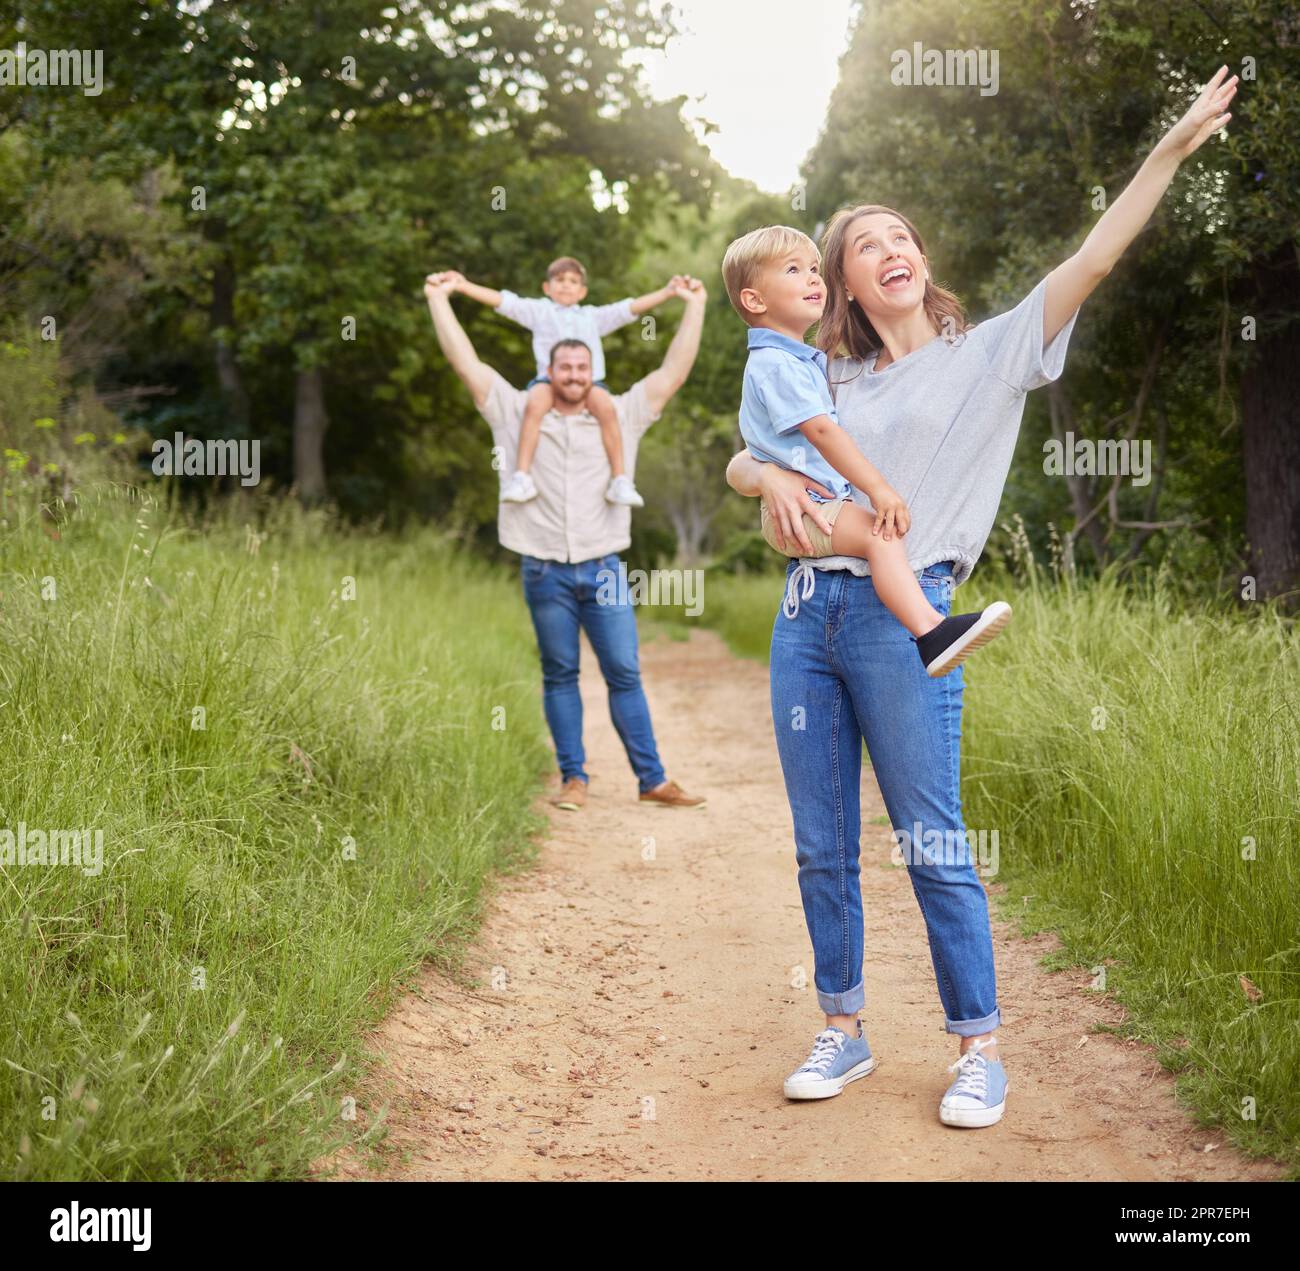 Exploring nature. Shot of a young family spending a day at the park. Stock Photo